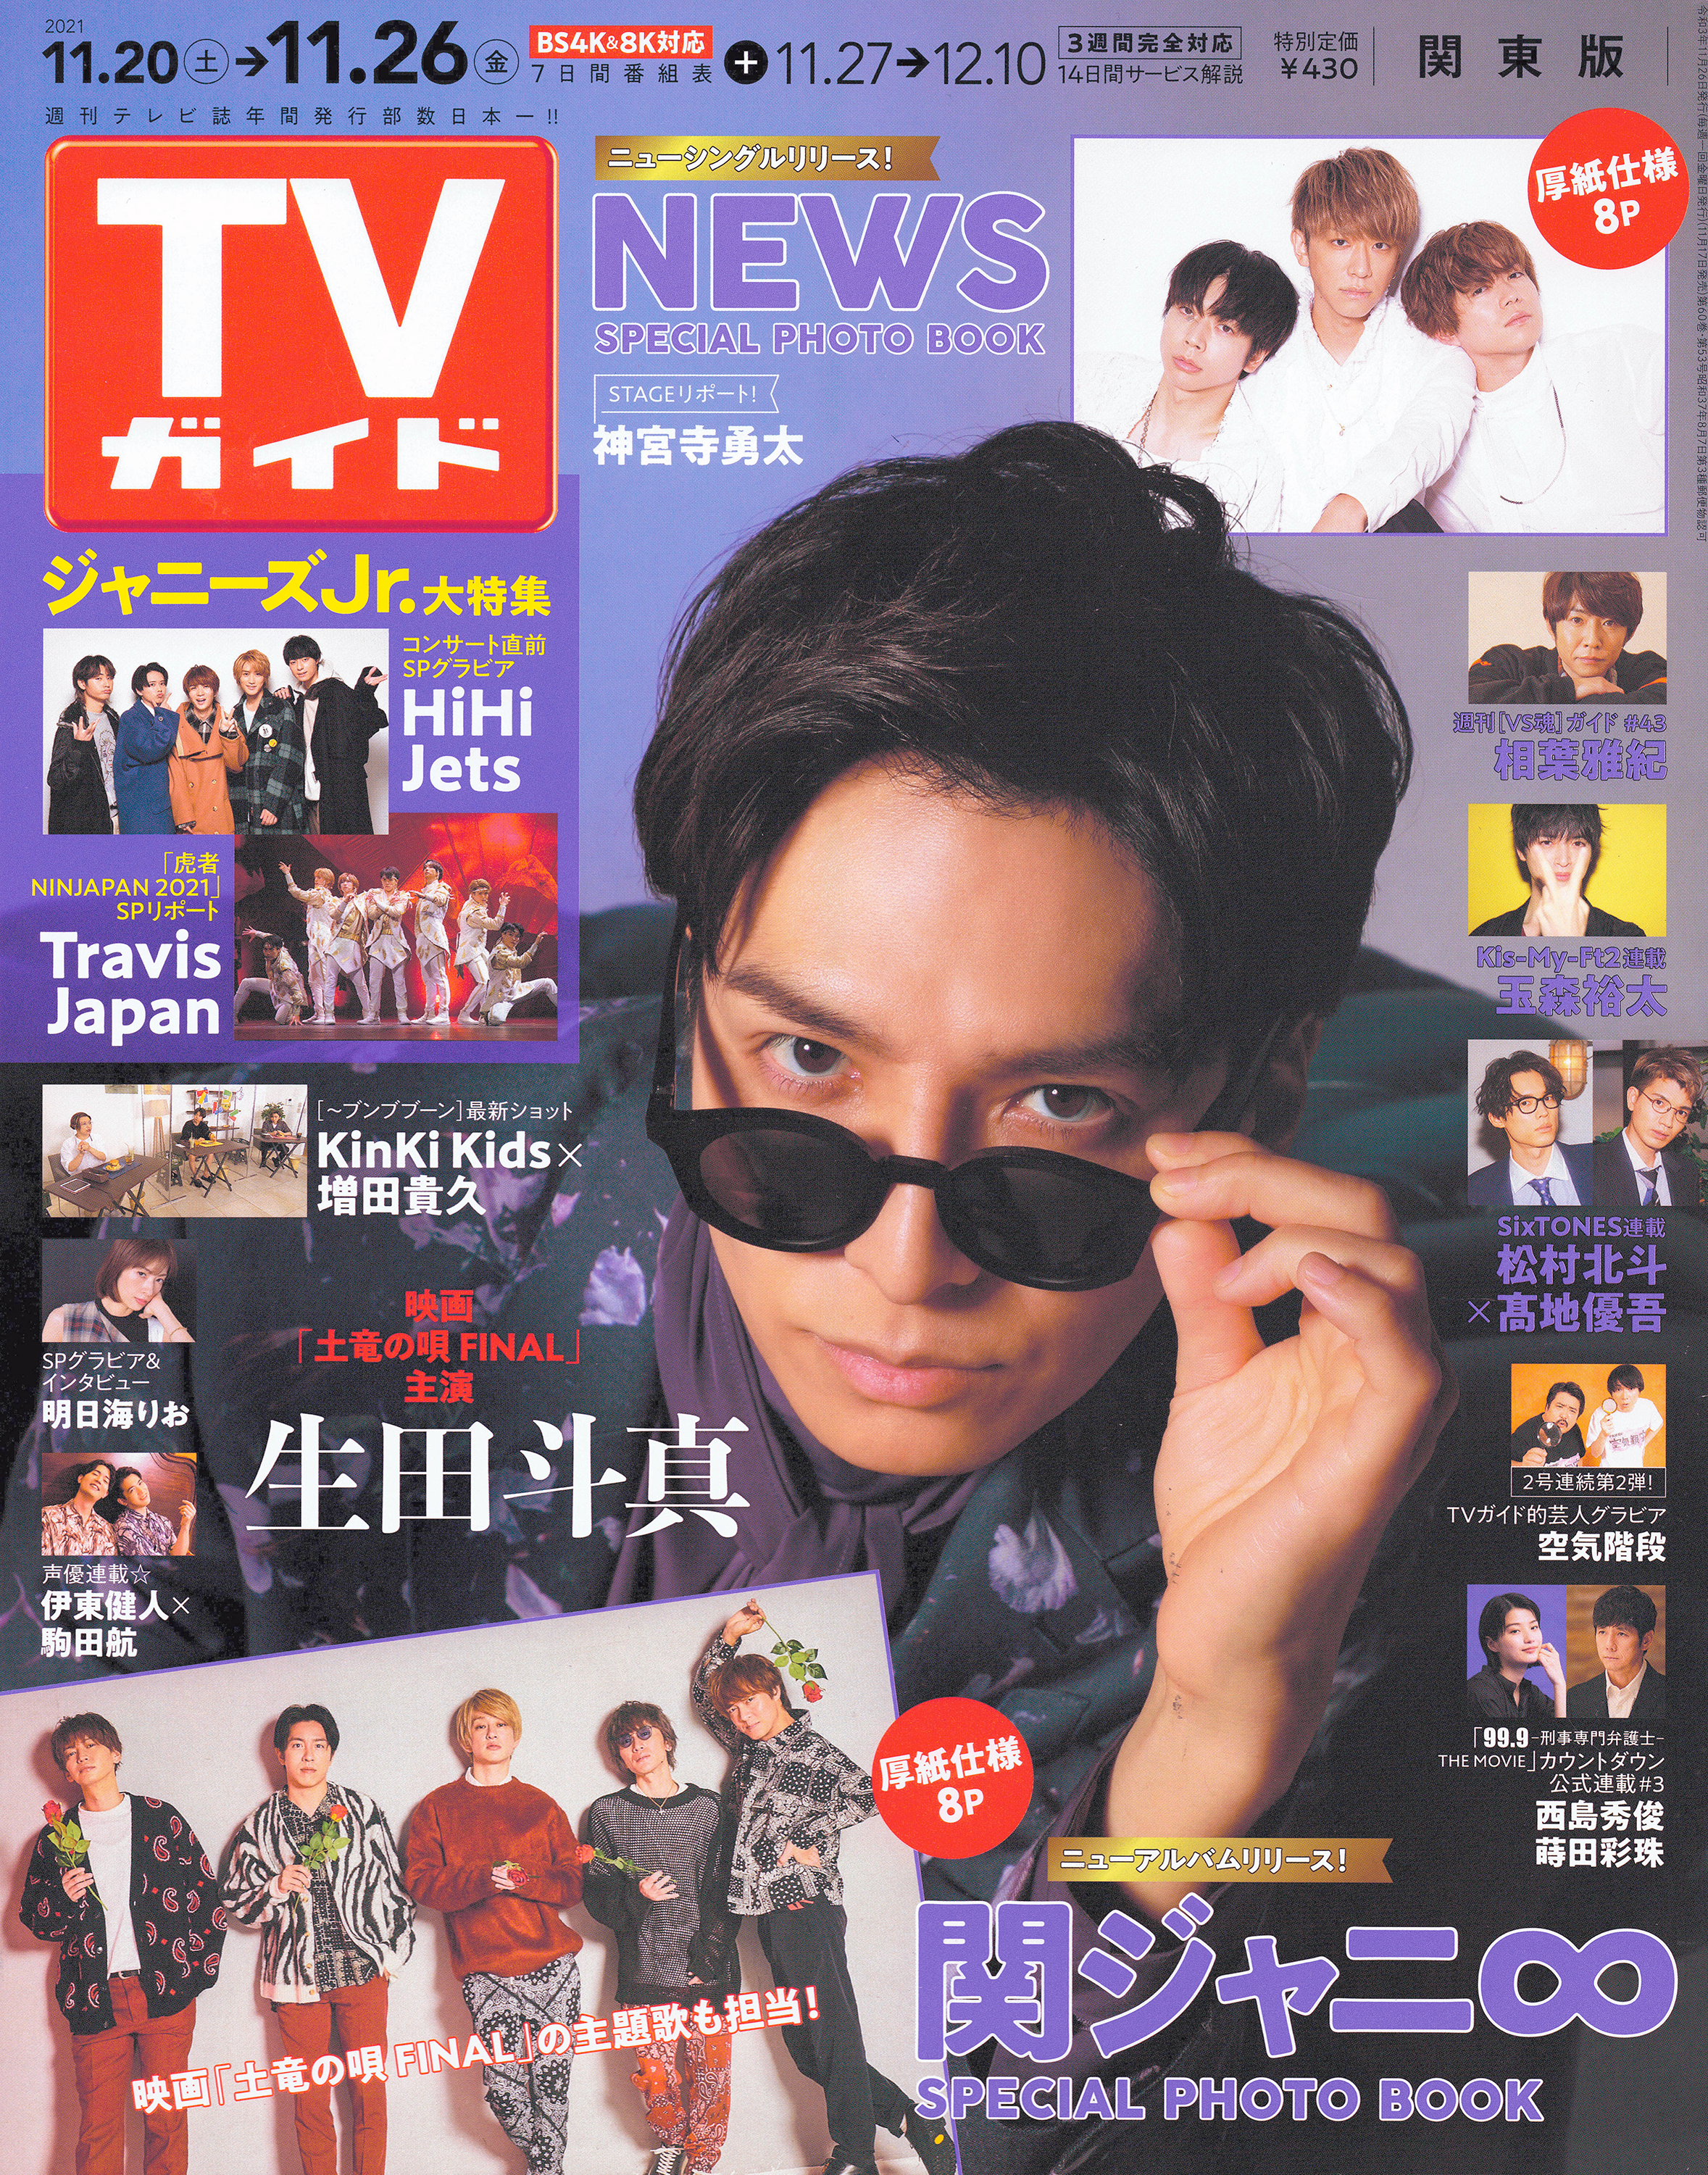 Listed Products on TV guide TOKYO NEWS AGENCY